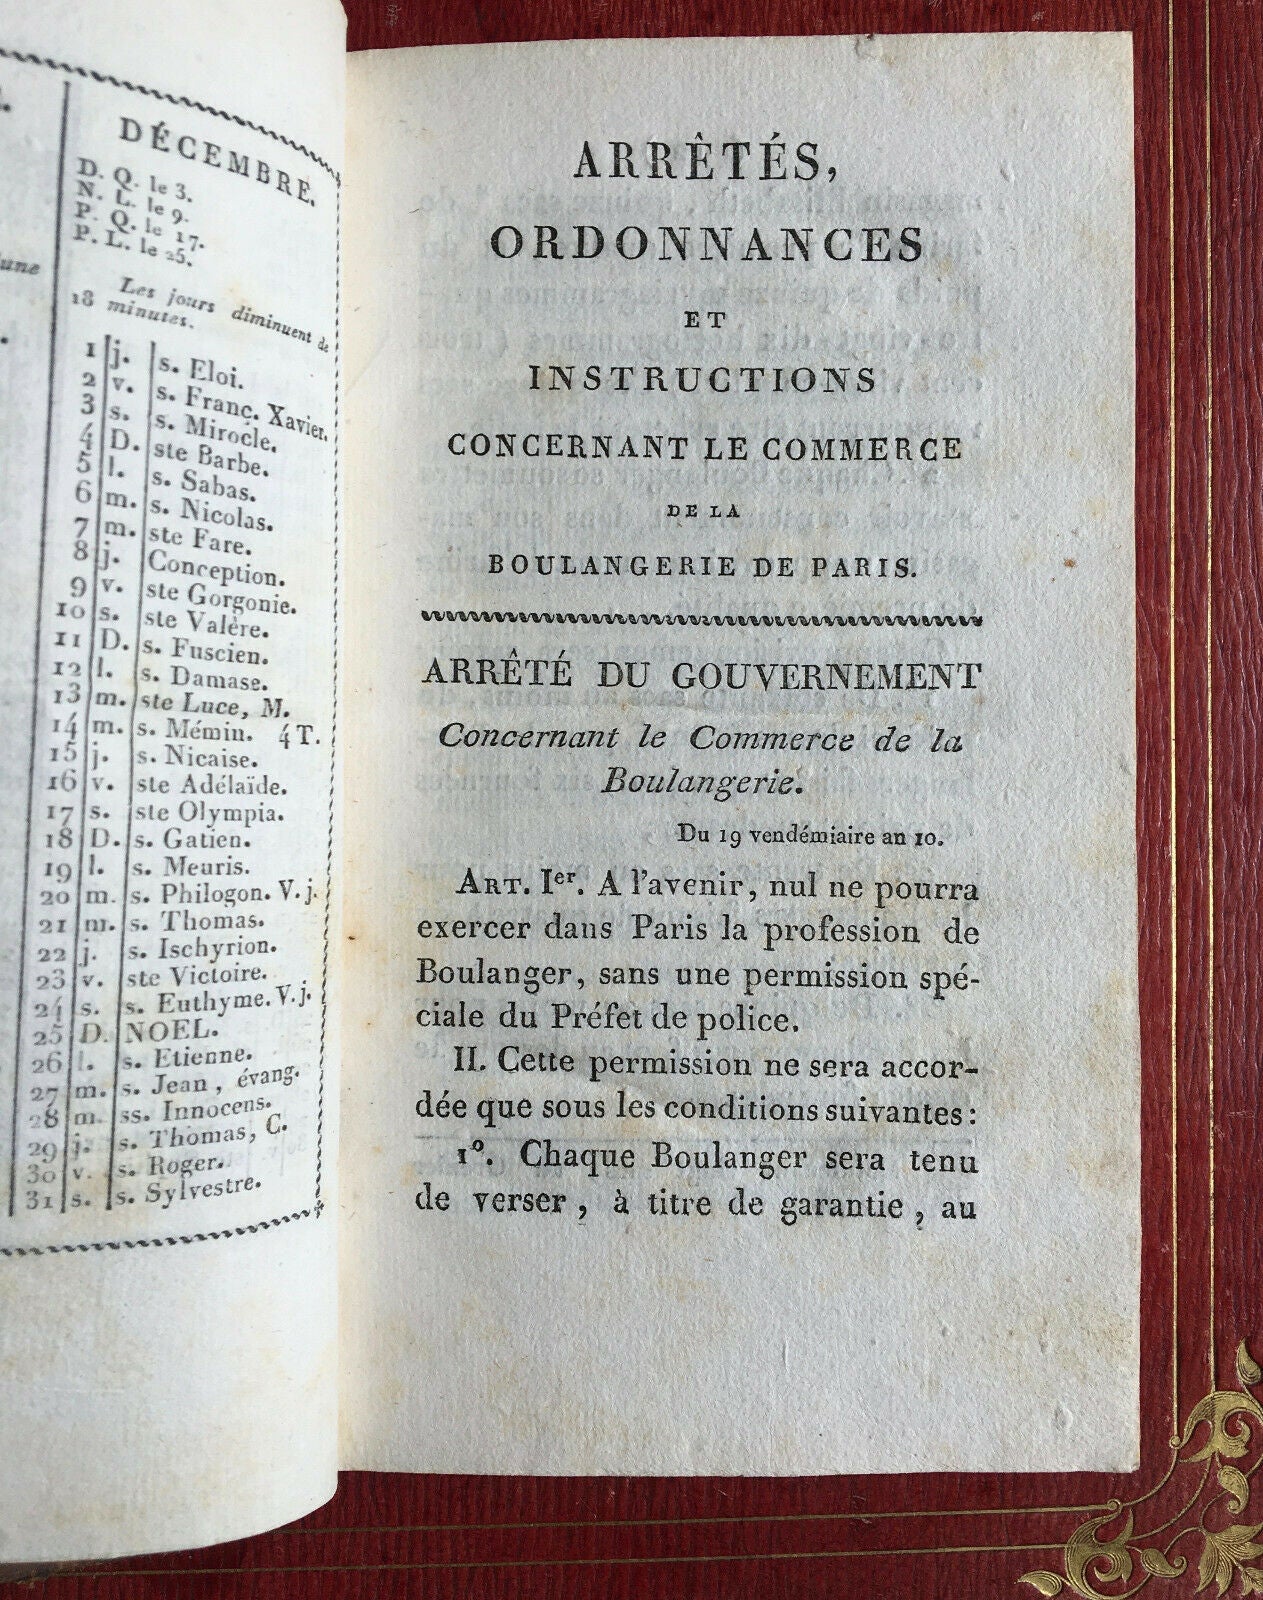 TABLE OF PARIS BAKERS, FOR THE YEAR 1825 - LEBÈGUE - 1825.